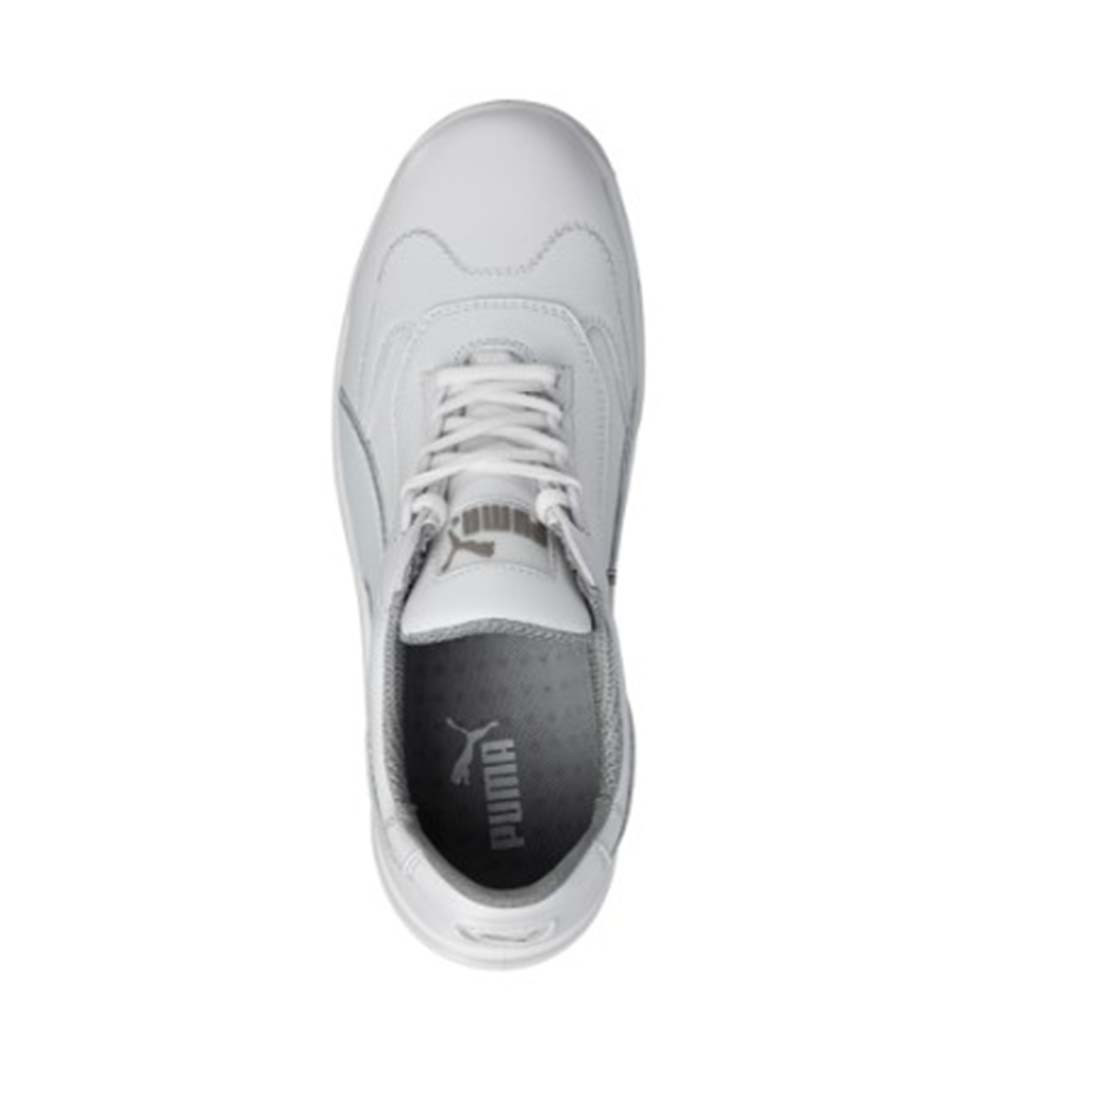 Puma S2 Clarity Unisex Protection Shoes - Footwear